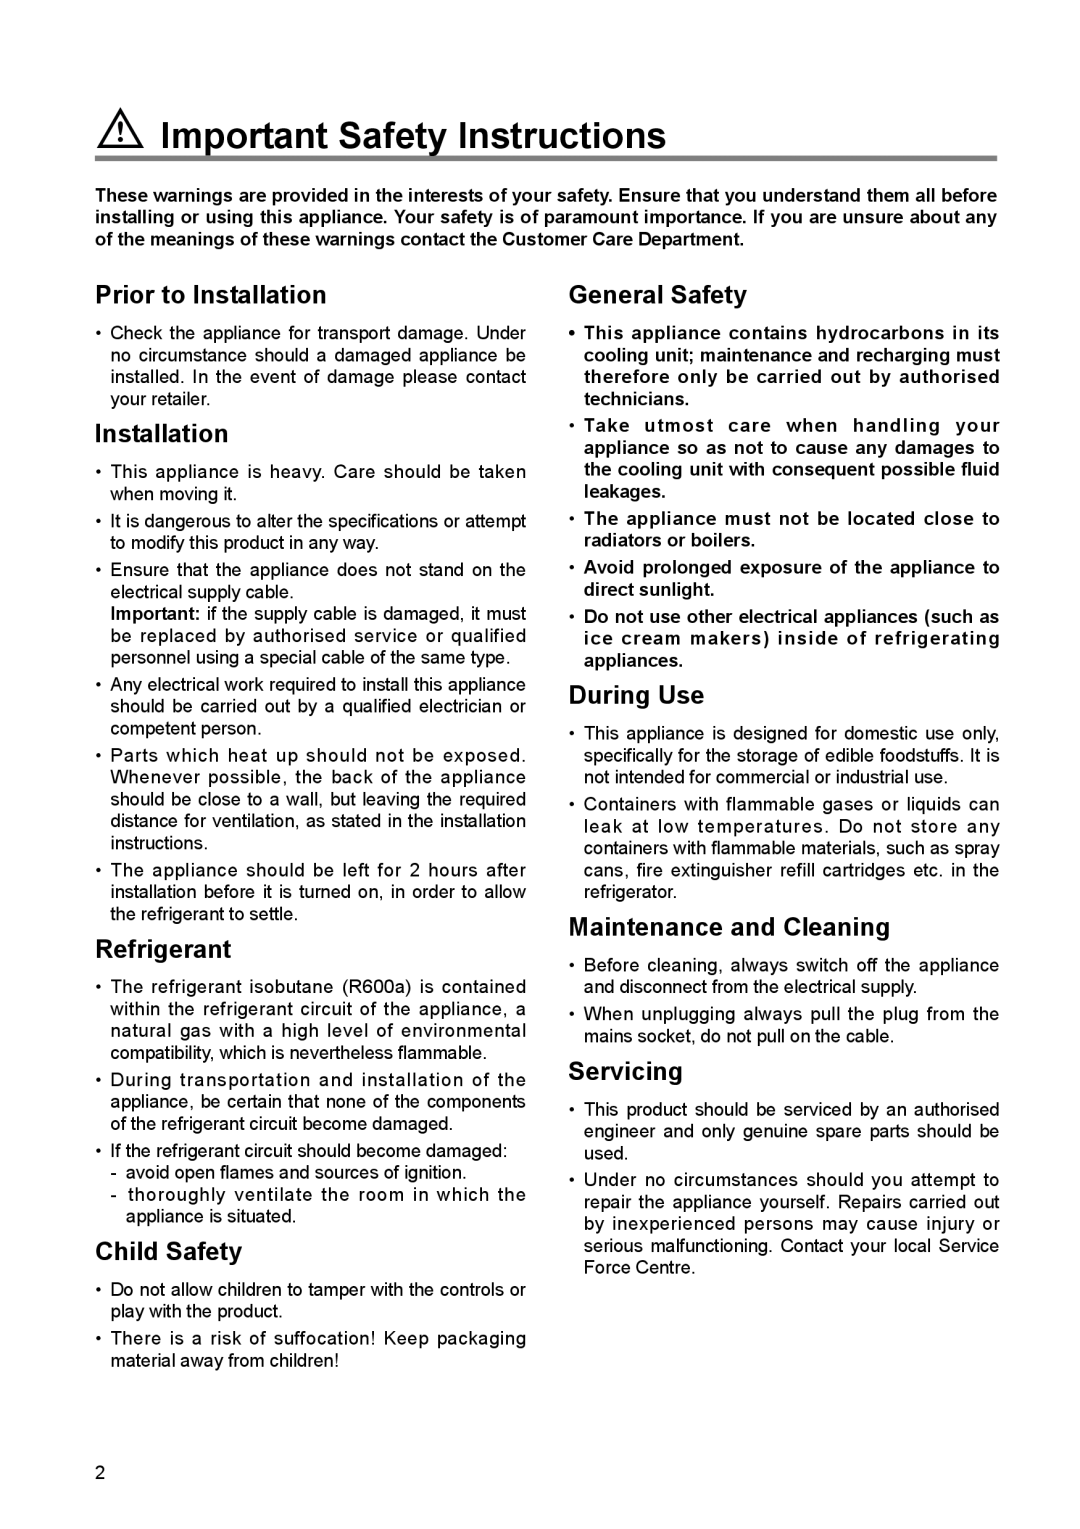 Tricity Bendix TBUL 140 Important Safety Instructions, Prior to Installation, Refrigerant, Child Safety, General Safety 